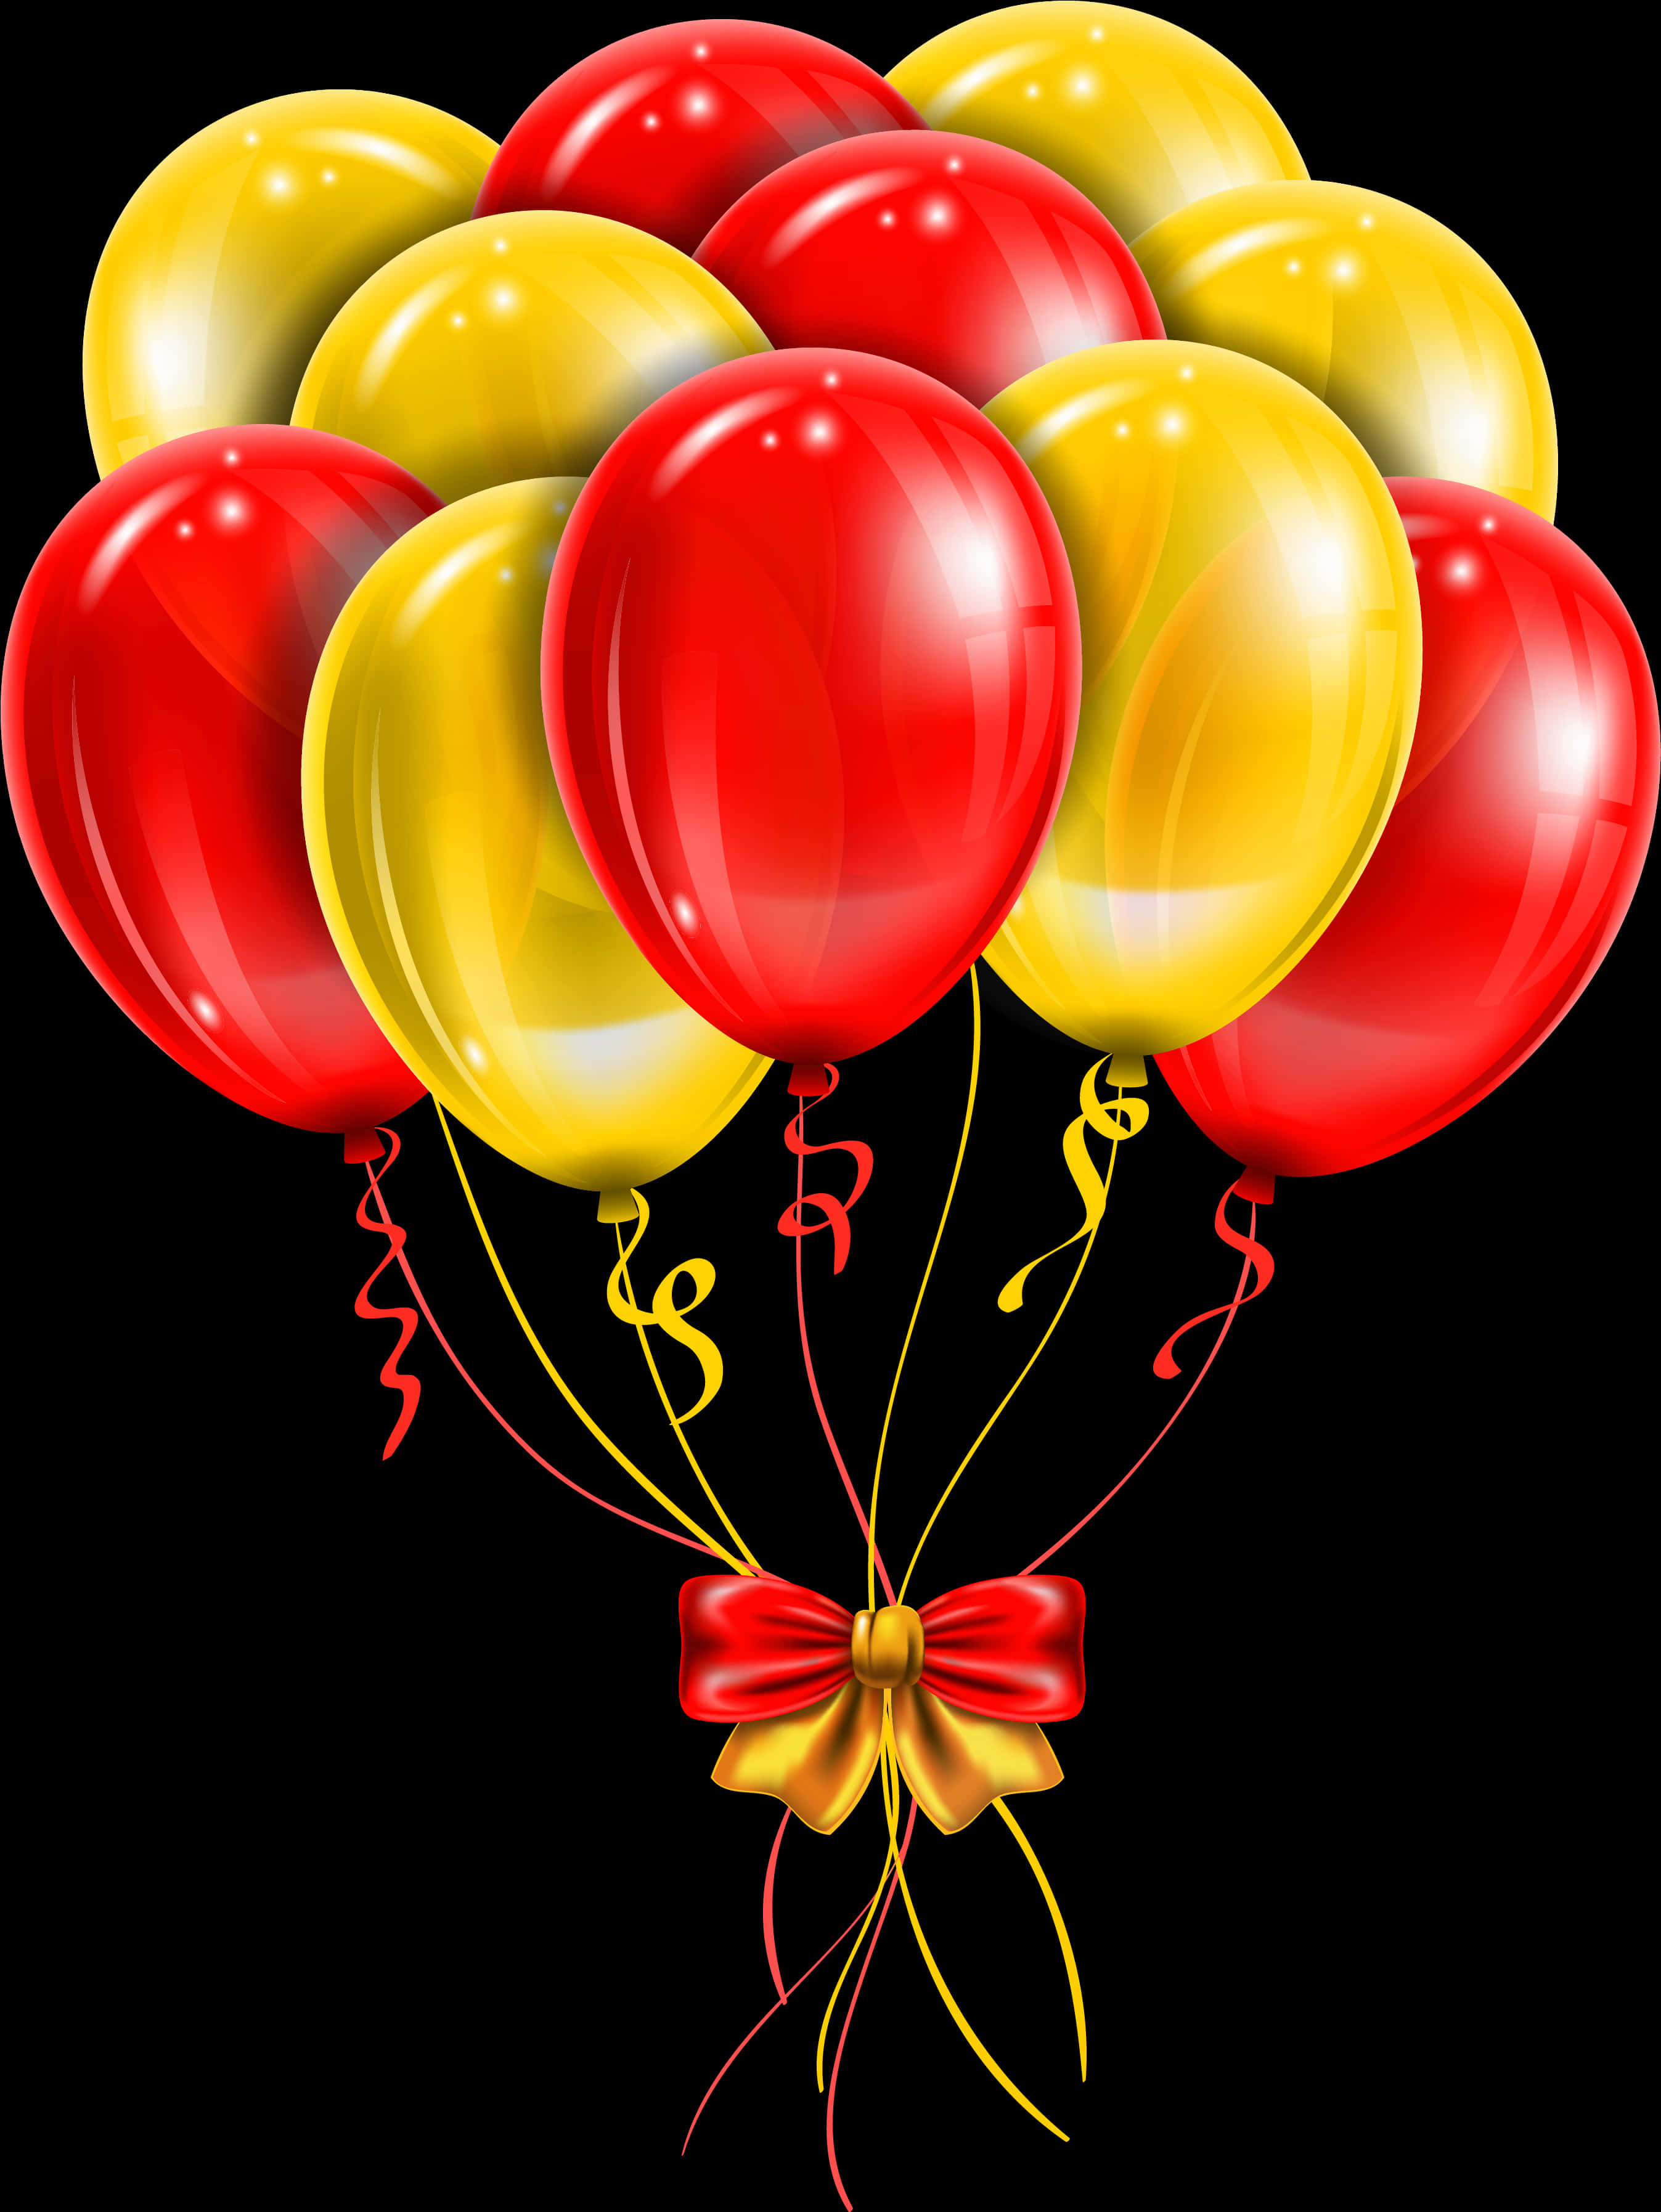 Festive Redand Yellow Balloons Bunch PNG